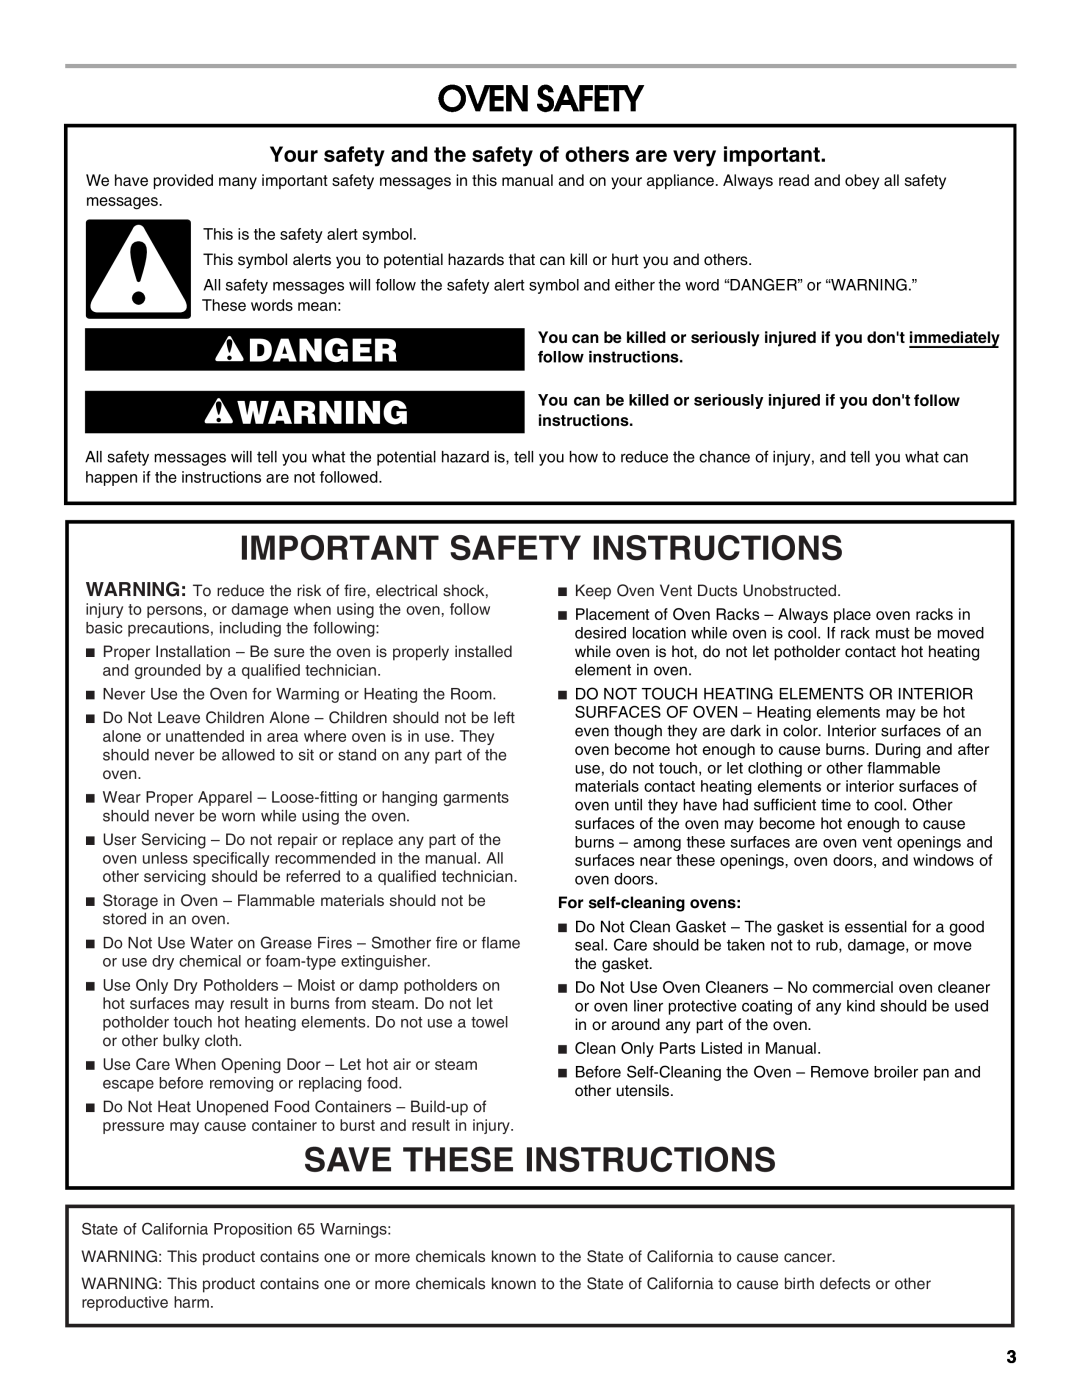 Jenn-Air JMW3430 manual Oven Safety, Important Safety Instructions, Save These Instructions, Danger 